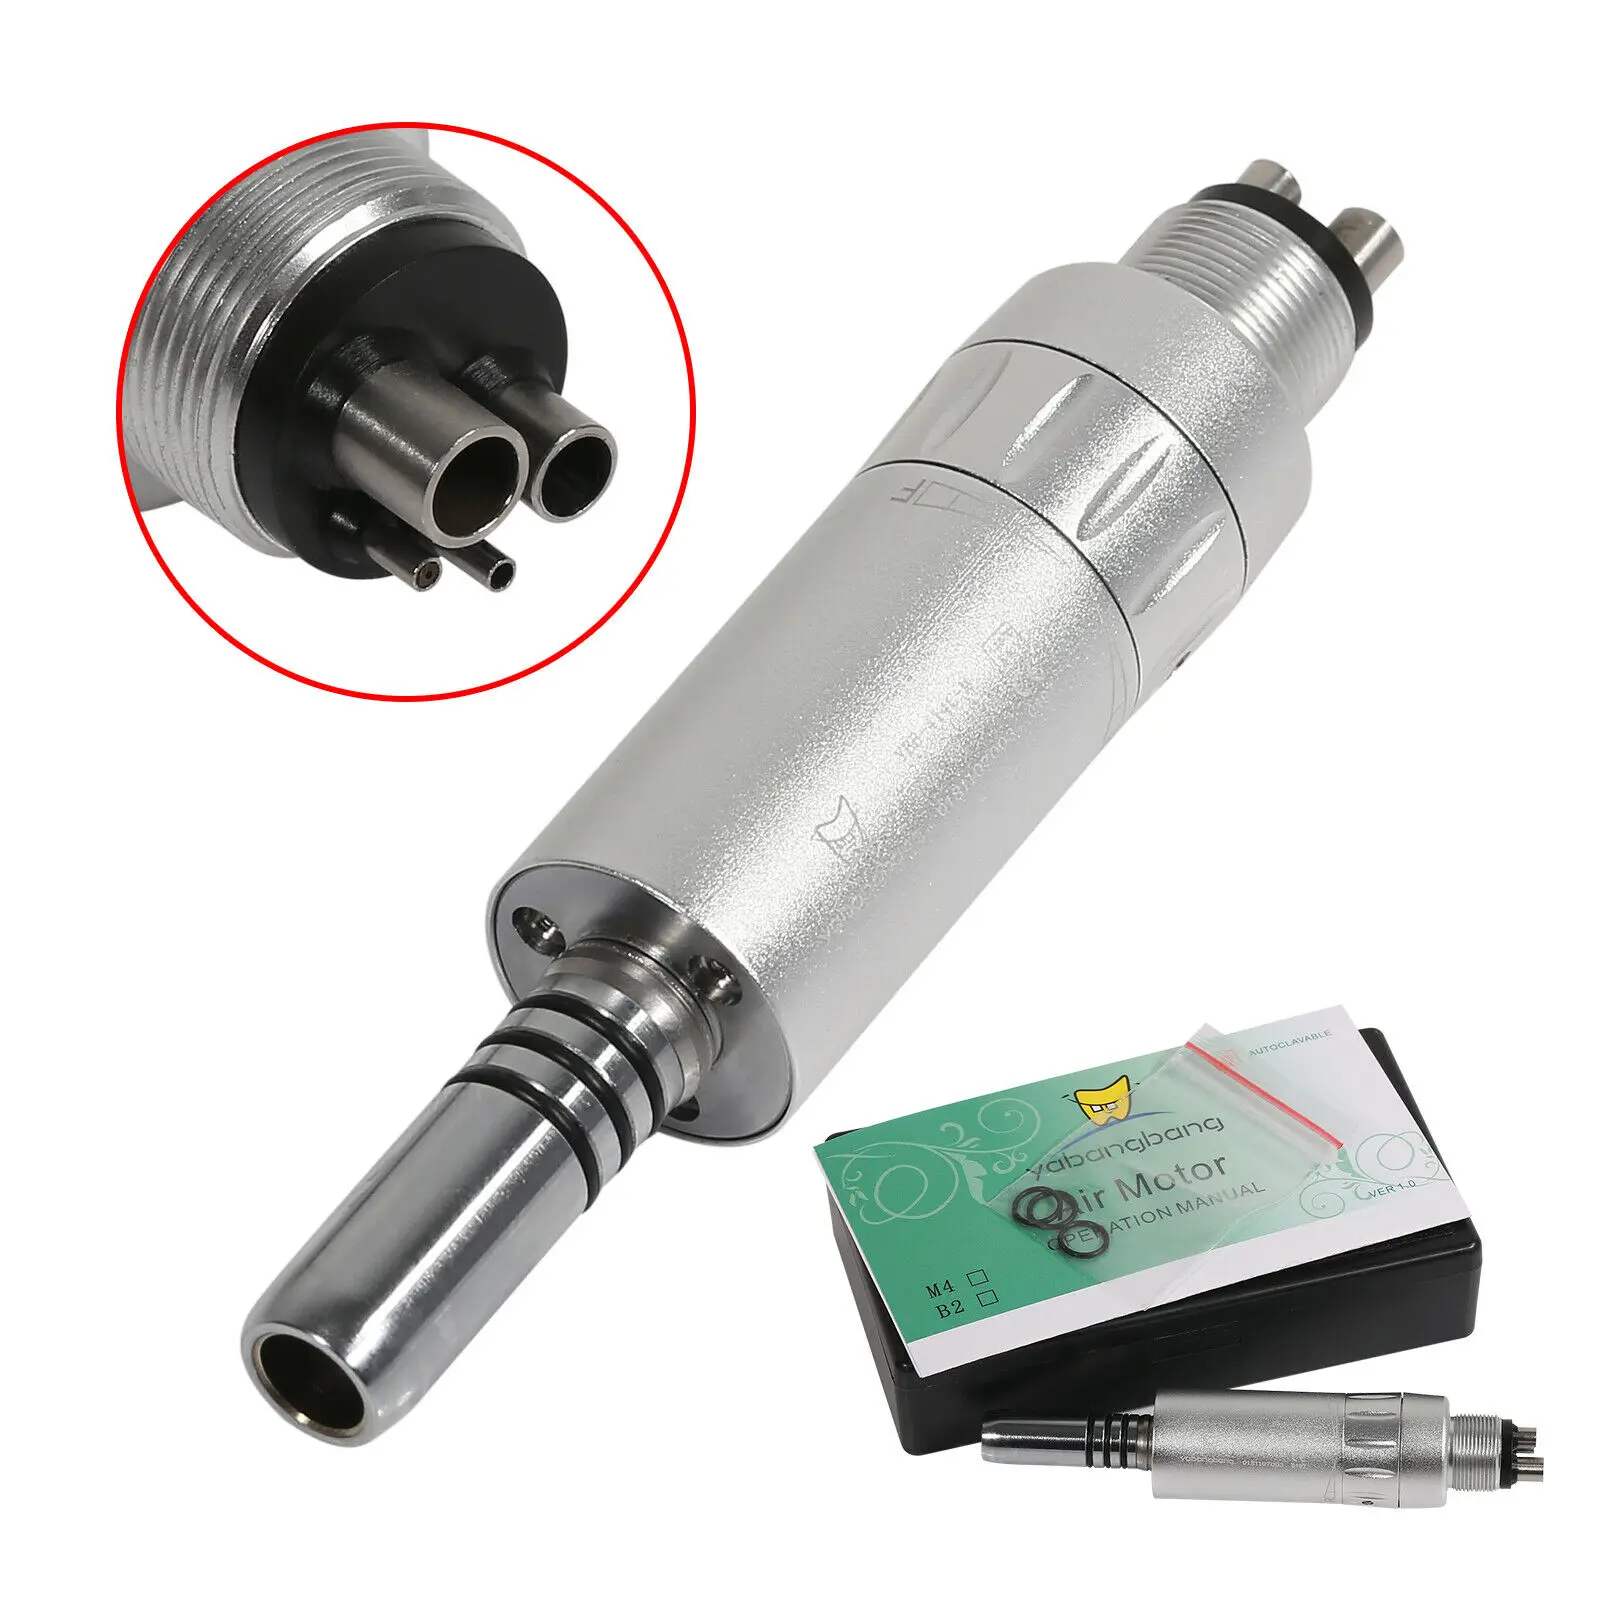 

New Dental Inner Water Spray Air Motor 4 Hole Handpiece Push Button Slow Low Speed For Contra Angle 1:1 Ratio Fit Nsk